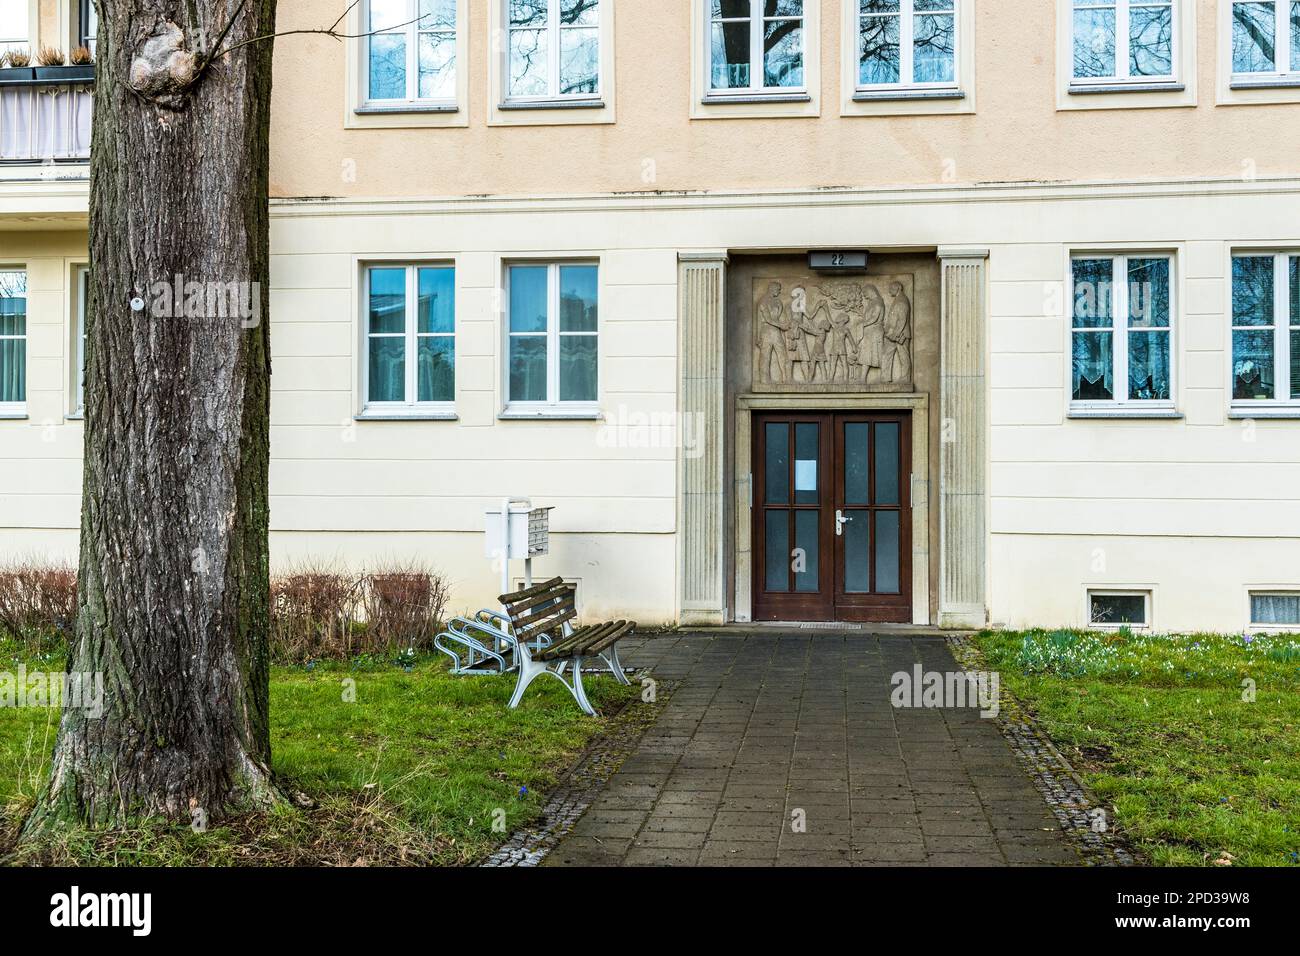 House entrance of a residential building area monument and planned city Eisenhüttenstadt, built from 1950 as an ideal city of the GDR. Here with facades designed in pictorial art, showing themes such as family, work and the common good. Architect Kurt W. Leucht Stock Photo